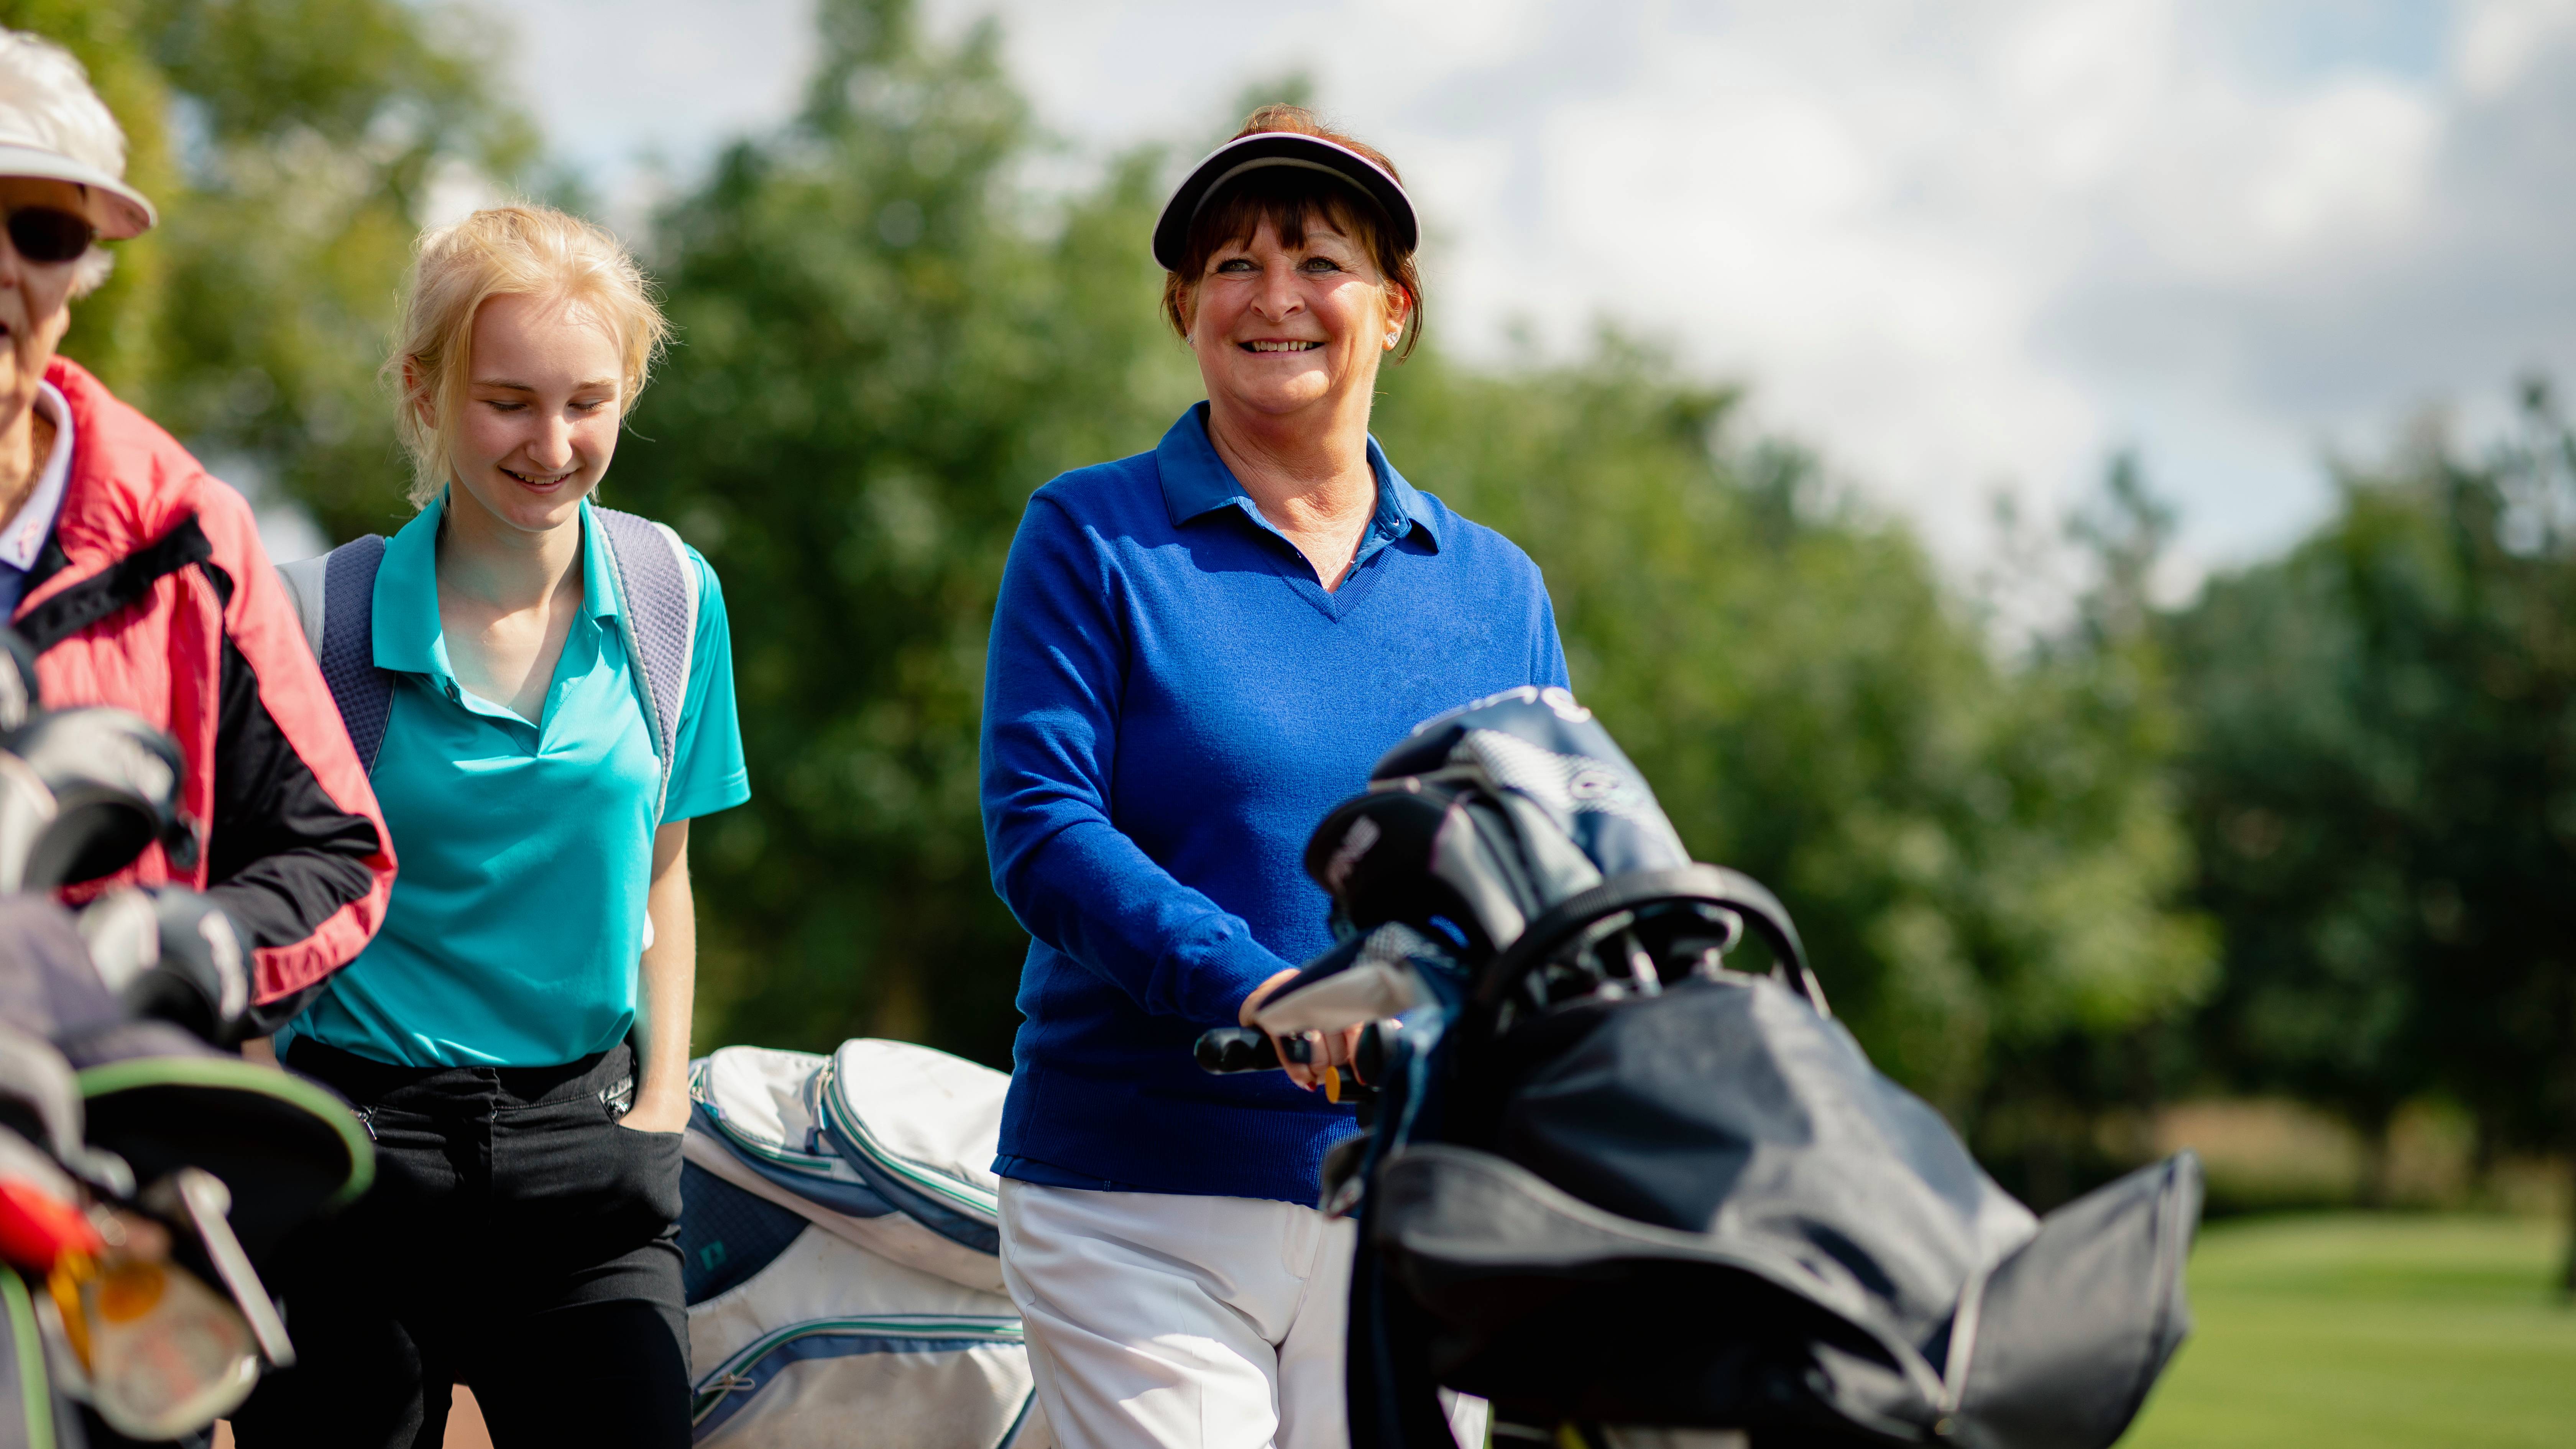 10 Tips To Help Women Settle In At A Golf Club